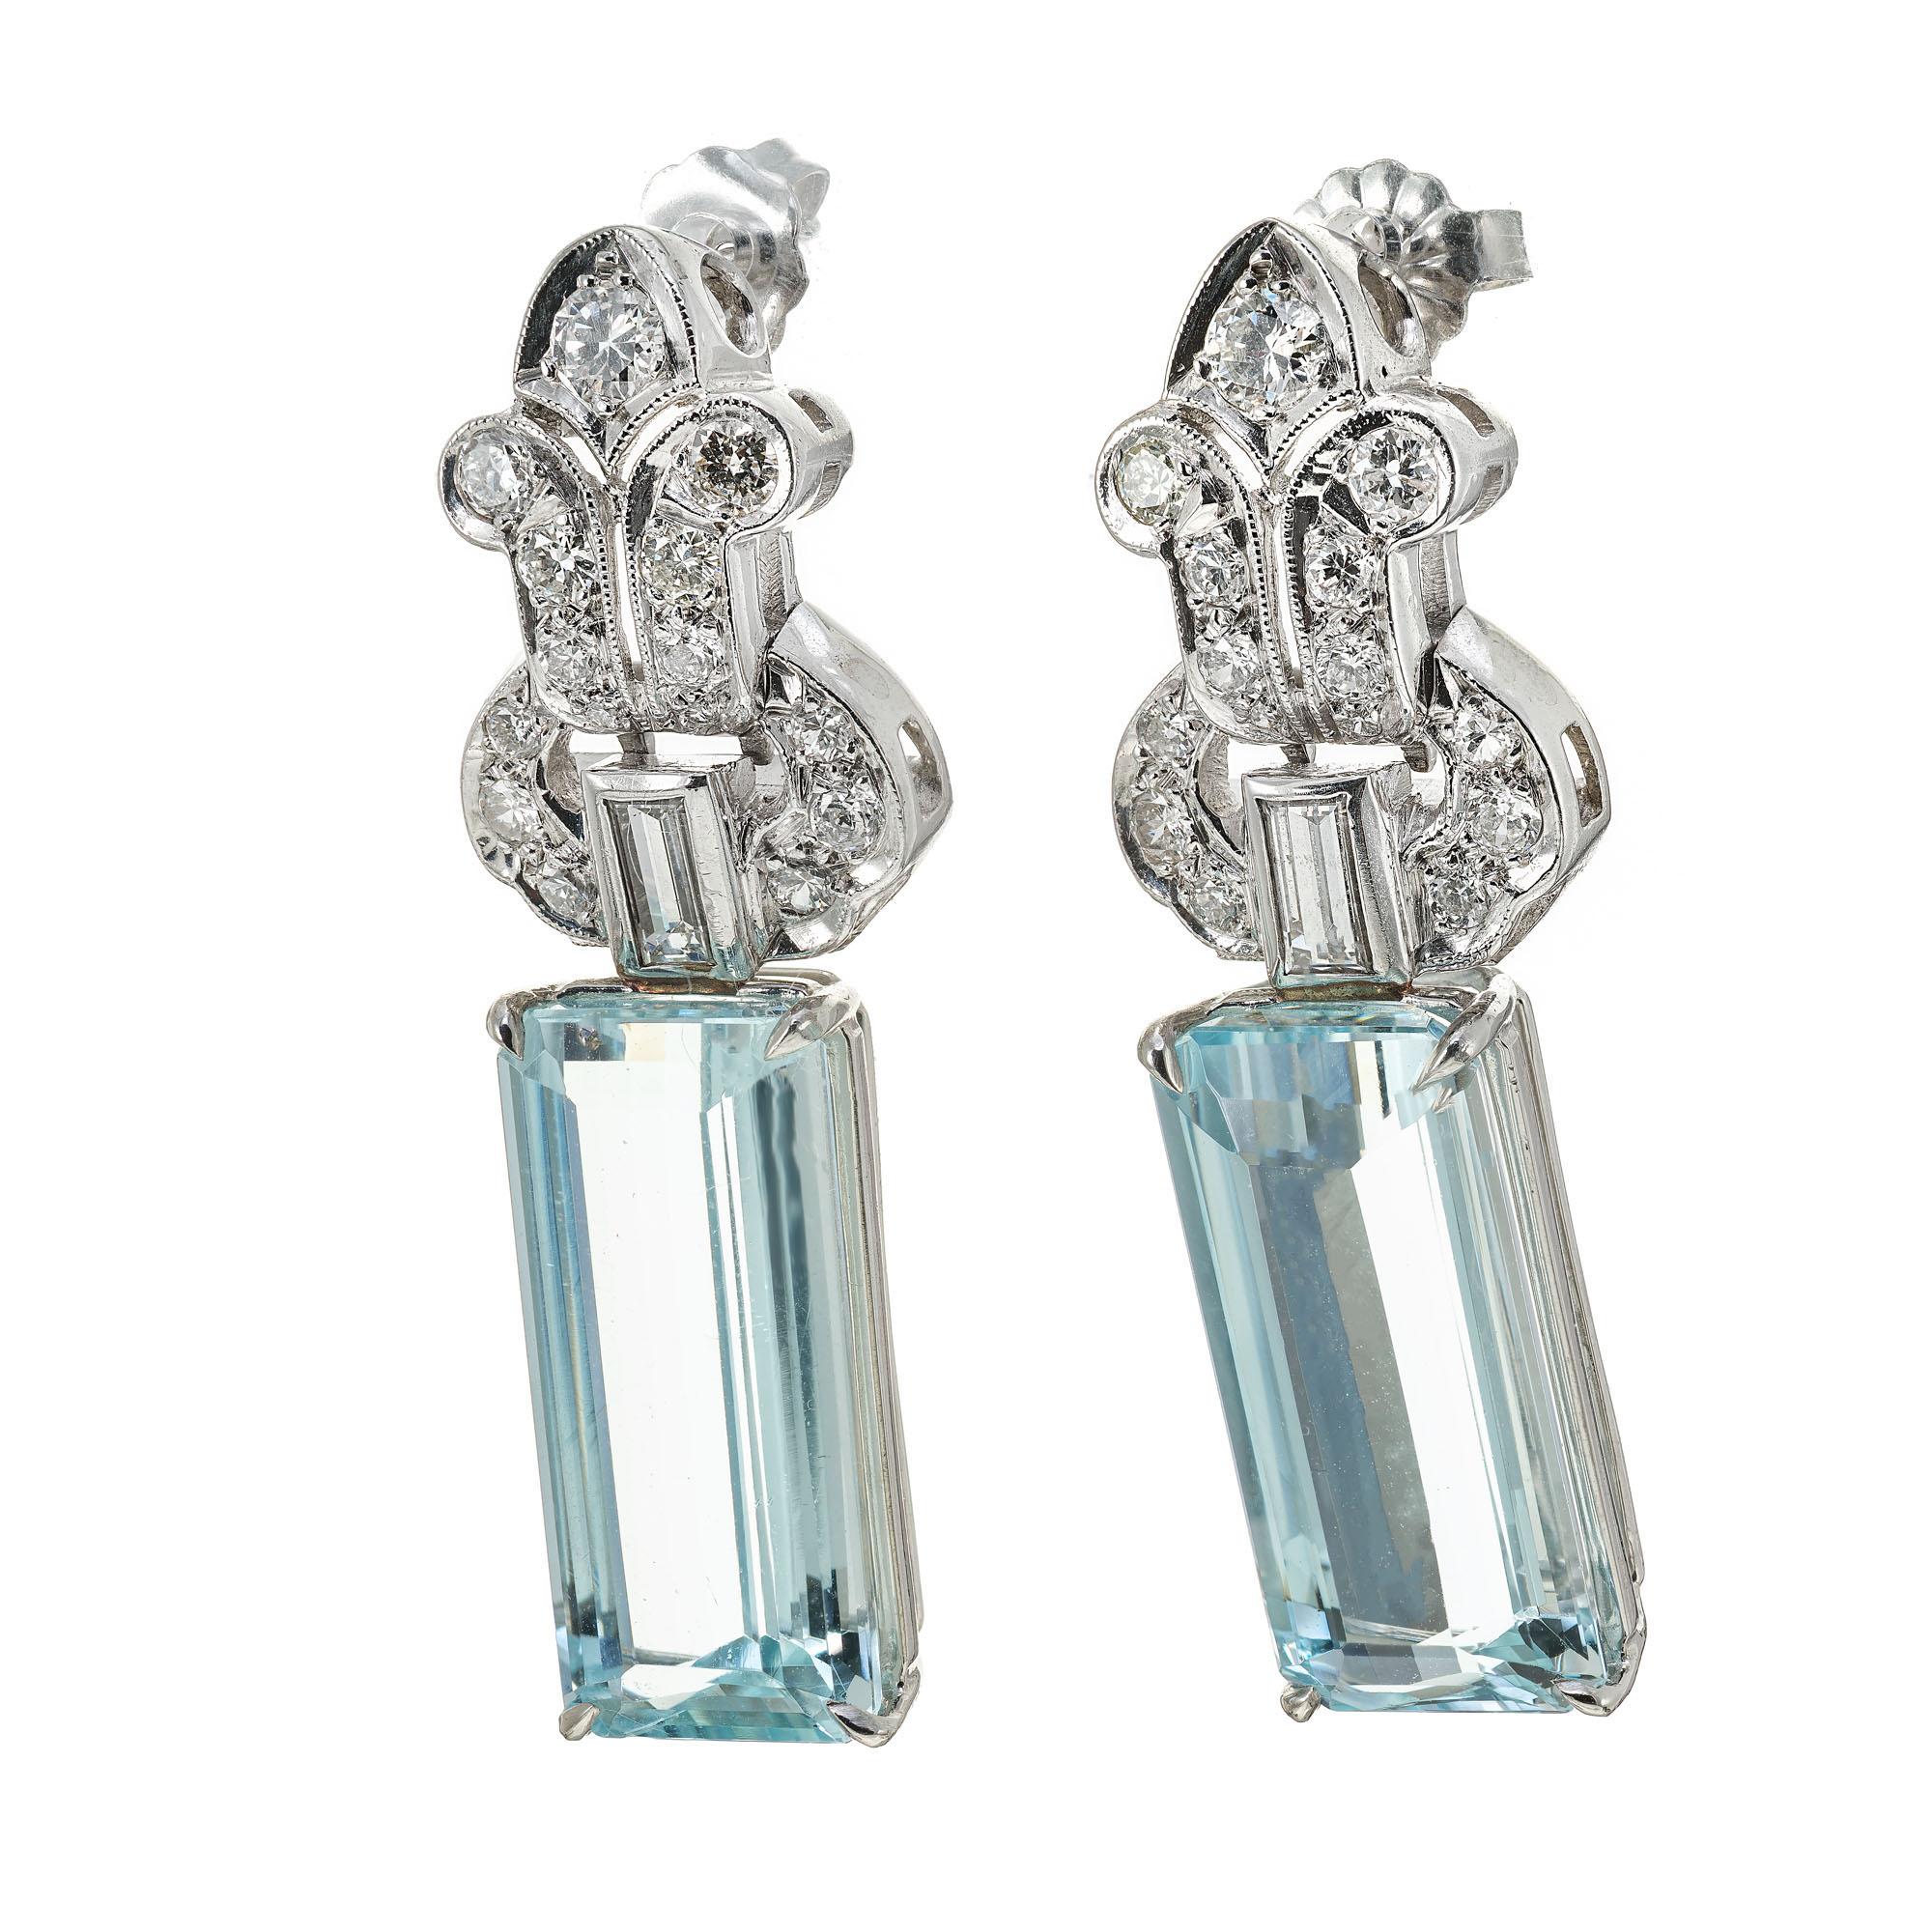 Late Art Deco, 1940's Original aqua and diamond earrings. 2 emerald cut elongated aquamarines 16.70cts set in platinum with 2 emerald and 30 round cut accent diamonds. 

2 greenish blue Emerald cut Aquamarine, approx. total weight 16.70cts, VVS –